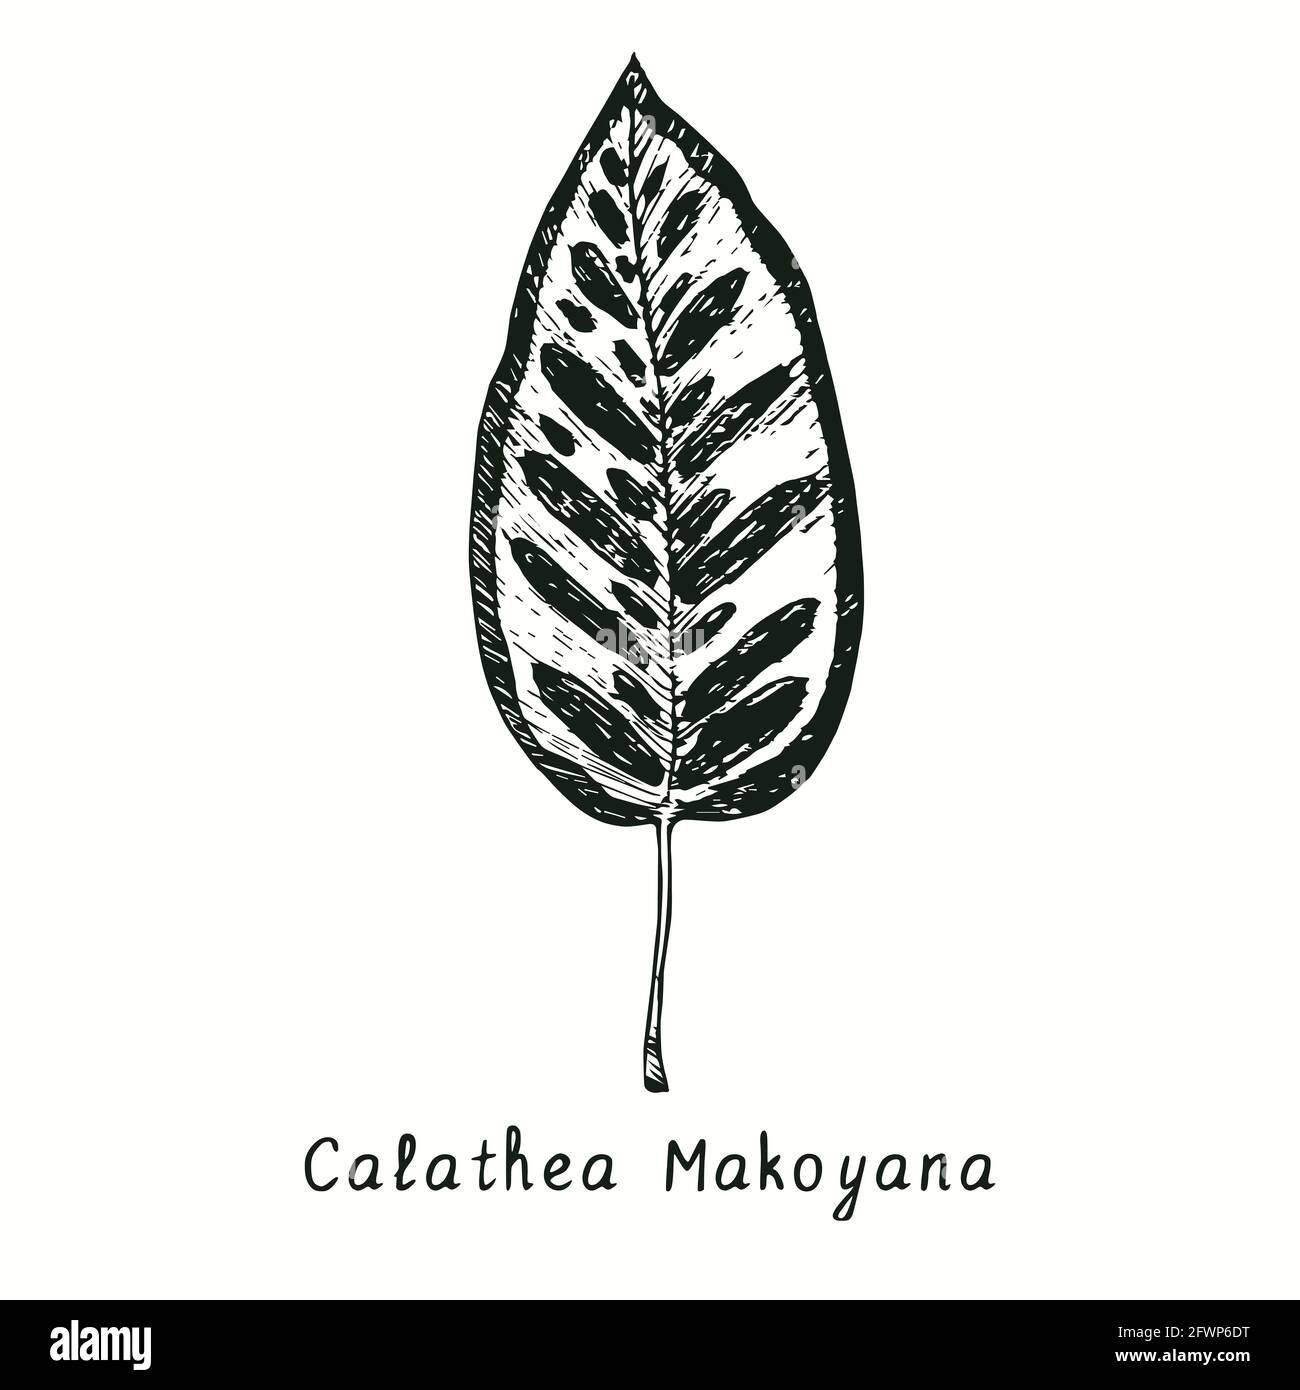 Calathea Makoyana (peacock plant or cathedral windows) leaf. Ink black and white doodle drawing in woodcut style. Stock Photo